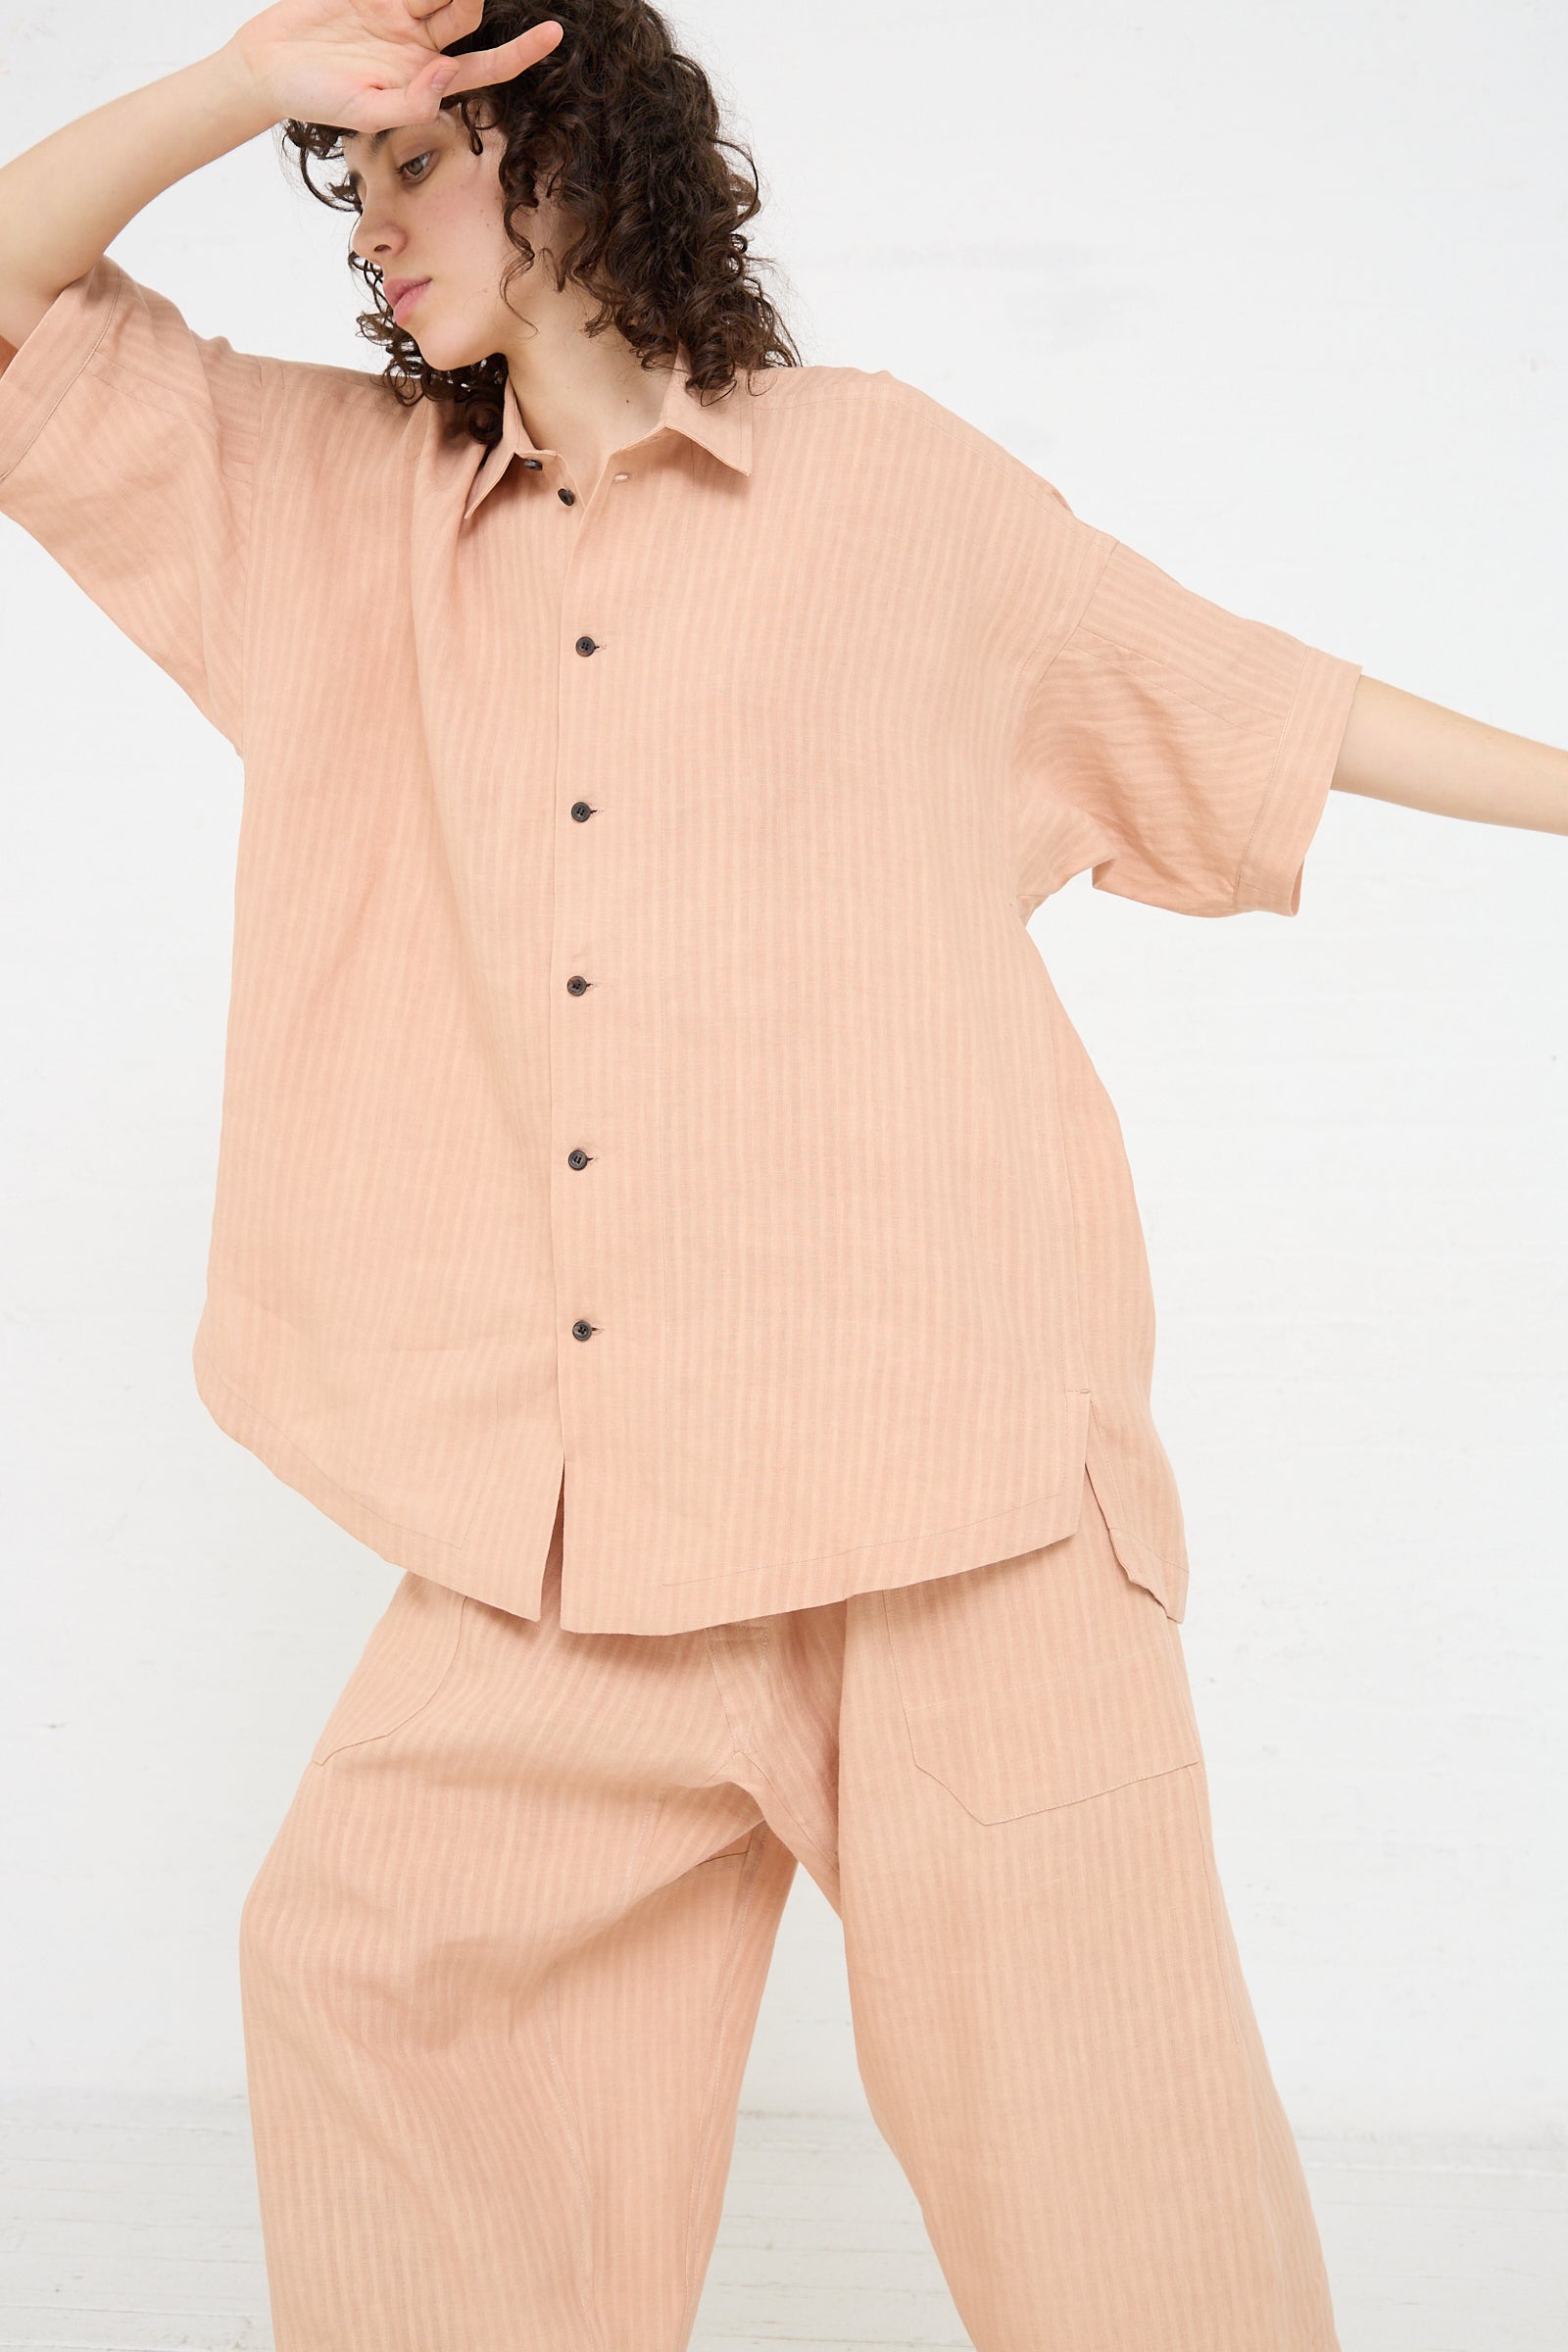 A woman wearing a pink Jan-Jan Van Essche Woven Linen Shirt in Ume and relaxed-fit pants.